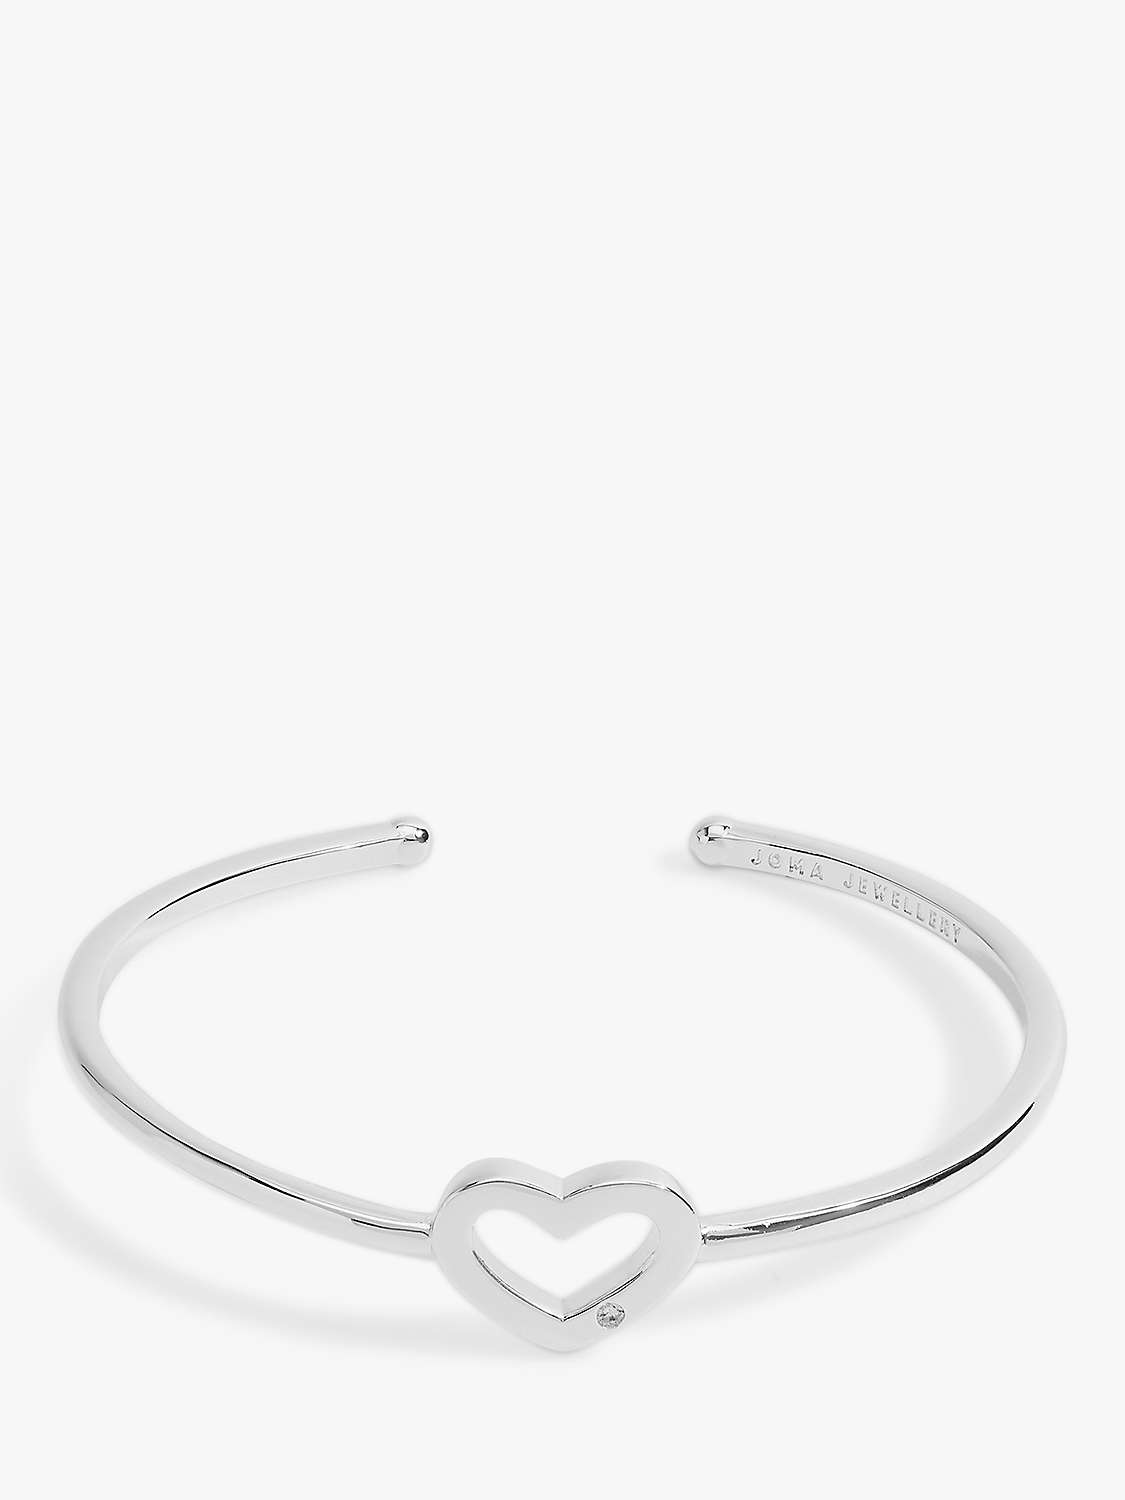 Buy Joma Jewellery Heart Open Bangle, Silver Online at johnlewis.com